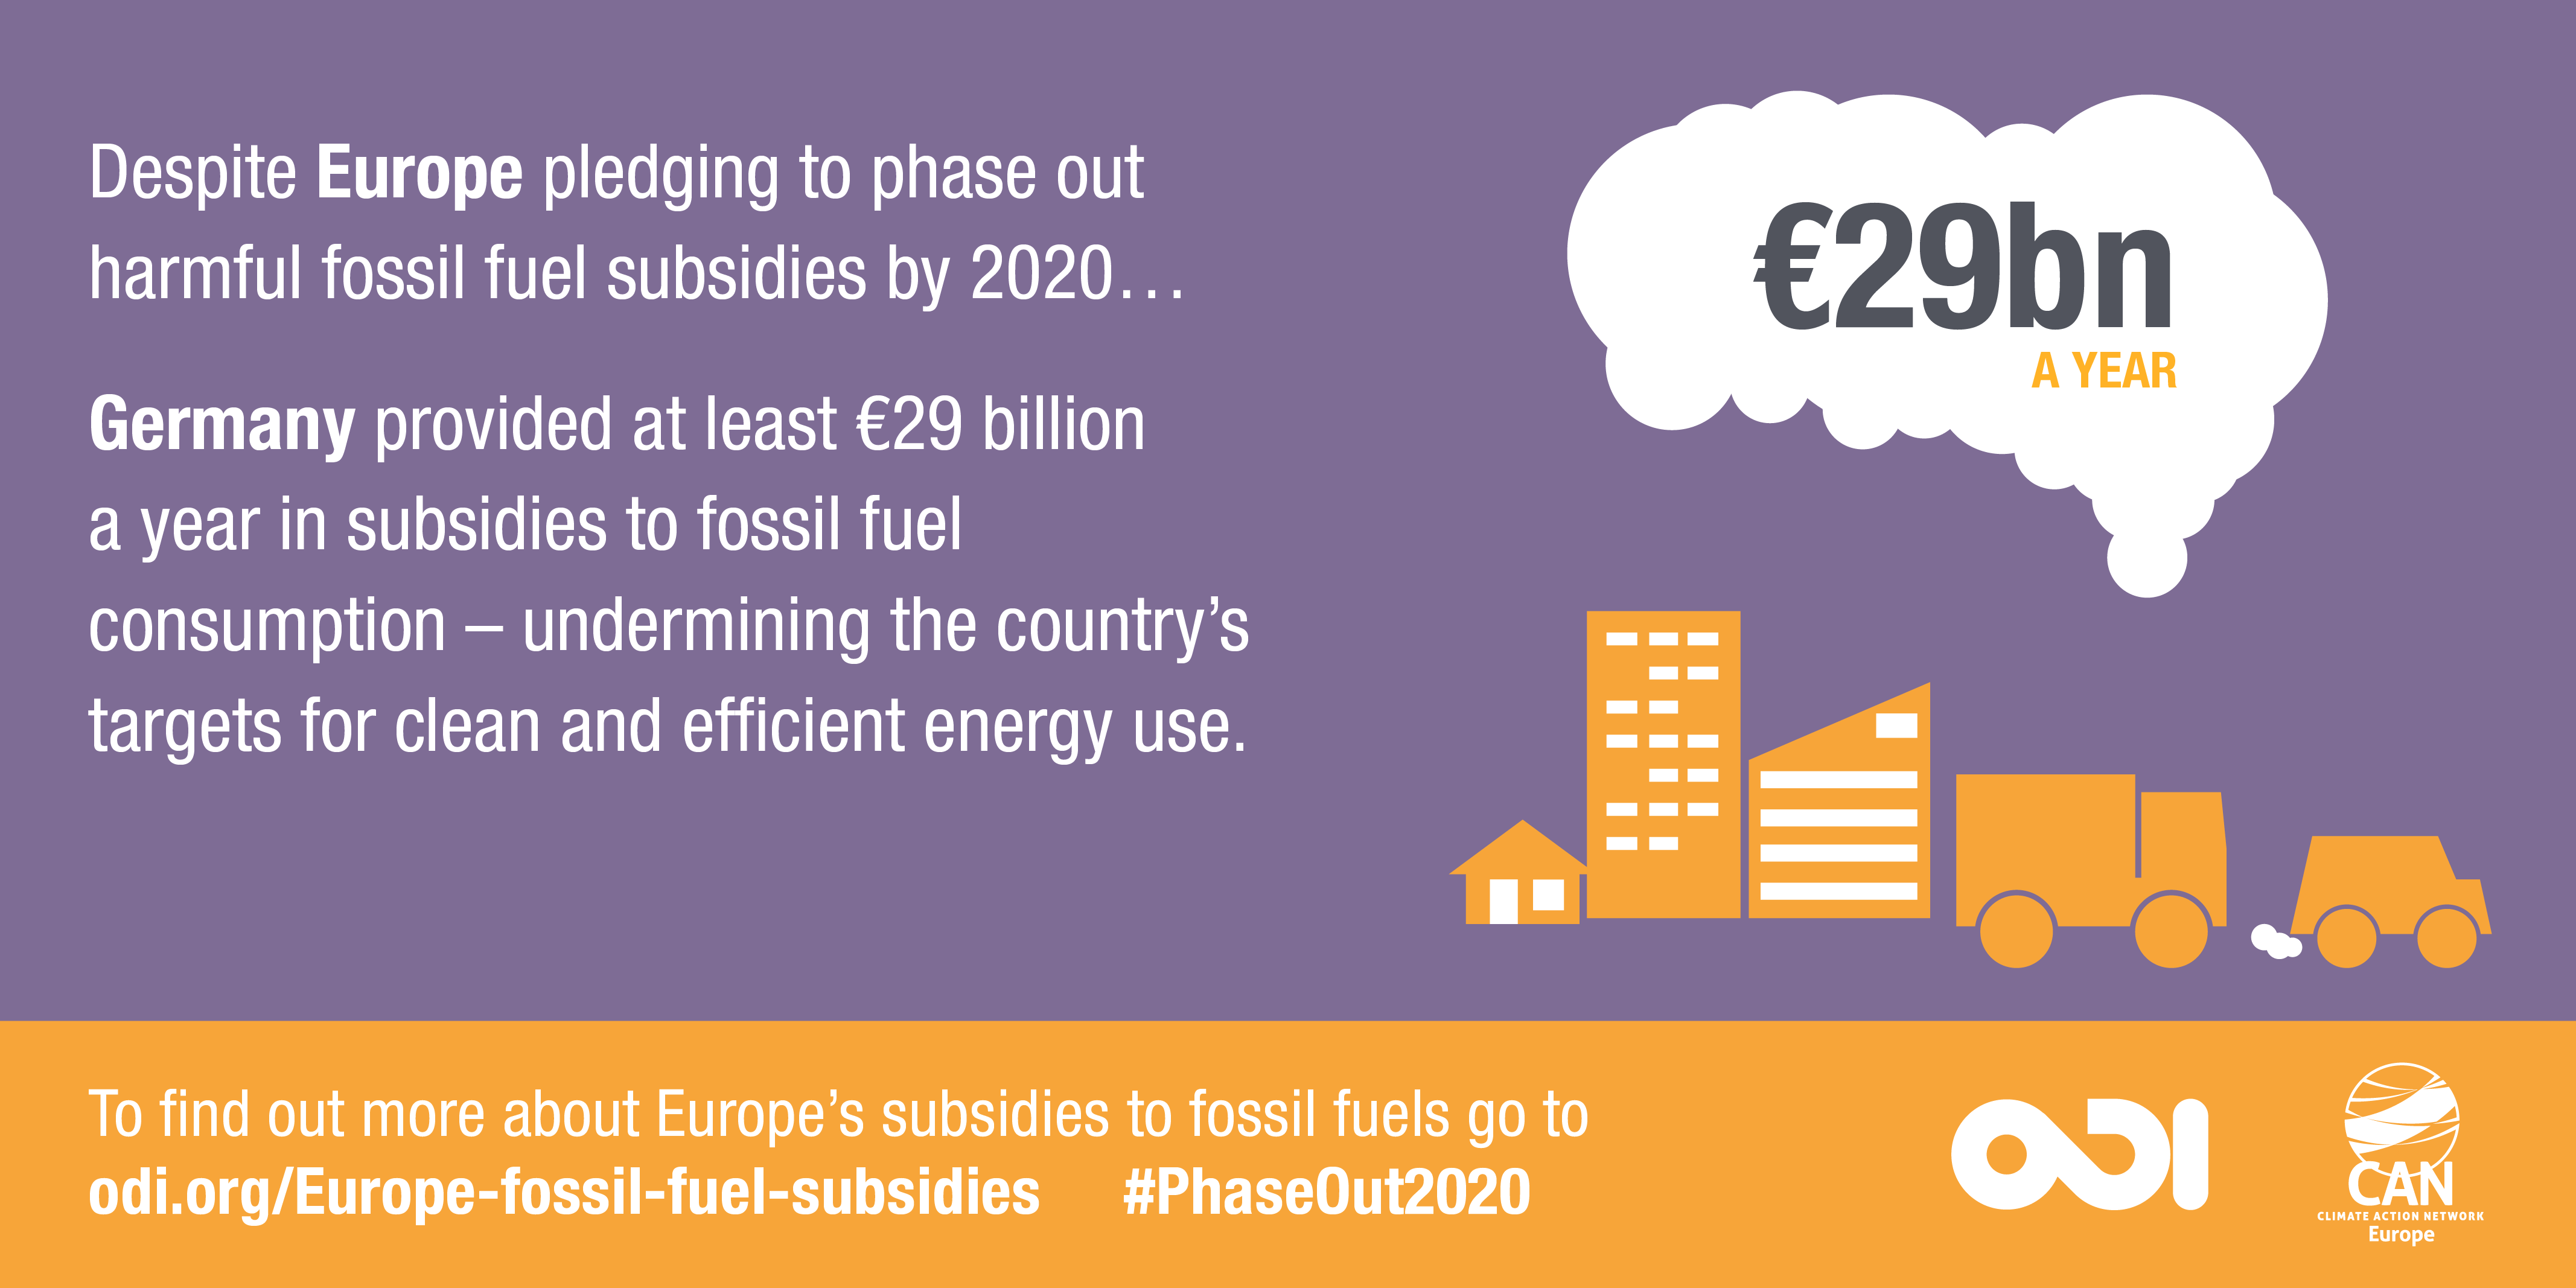 Infographic: Germany provided at least €29 billion a year in subsidies to fossil fuel consumption - undermining the country's targets for clean and efficient energy use.